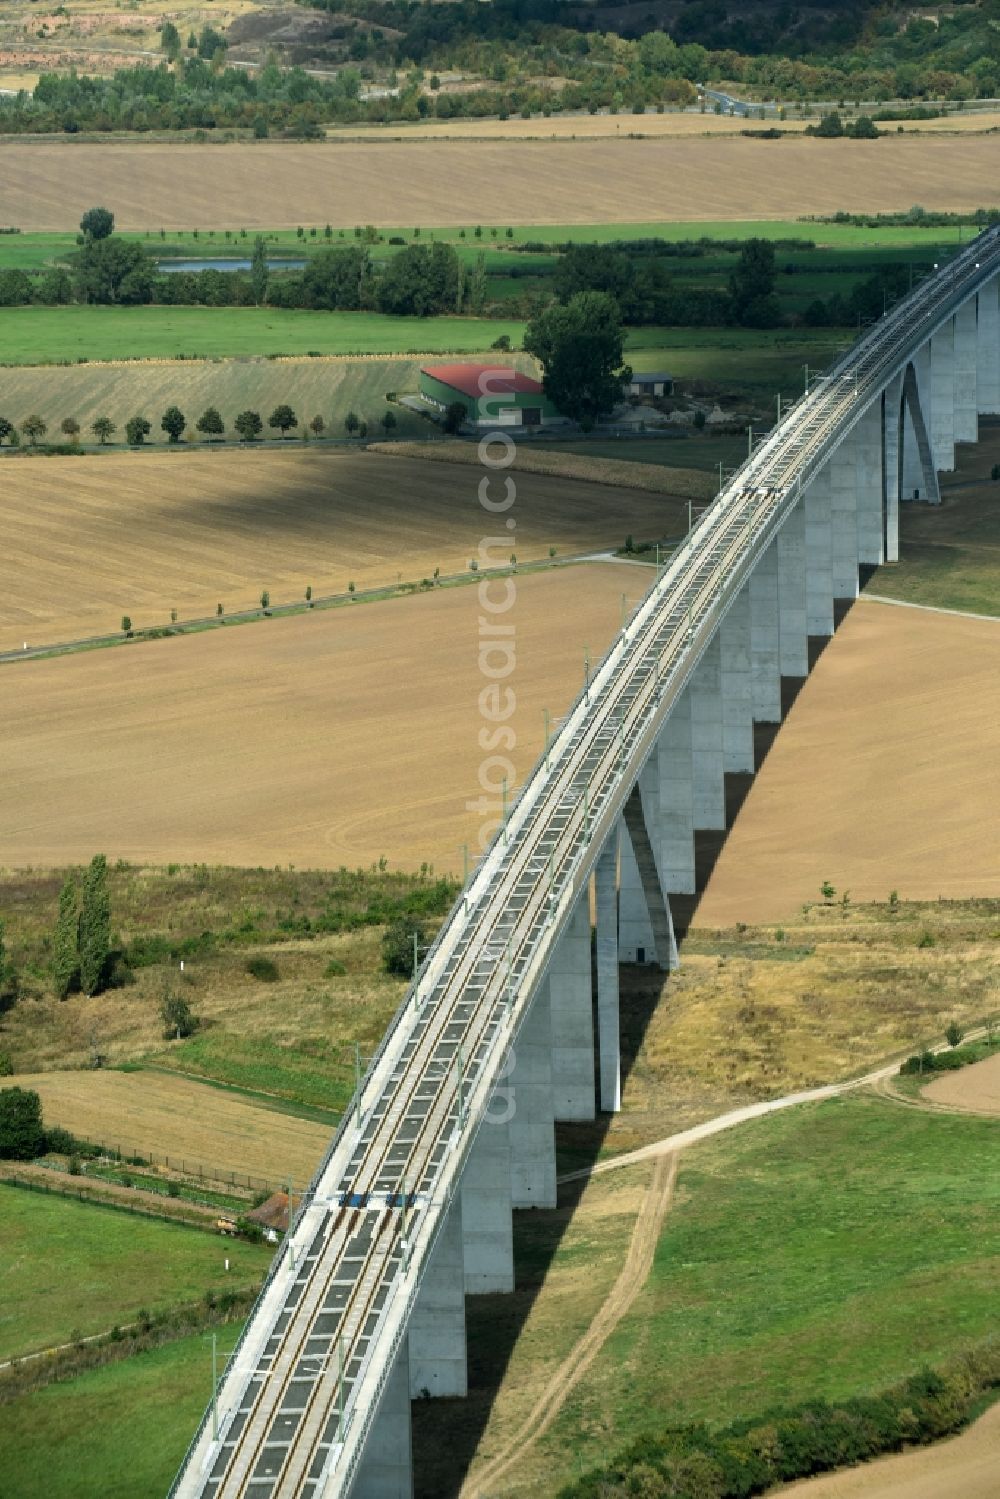 Aerial image Karsdorf - Unstruttal bridge in Karsdorf in Saxony Anhalt. The concrete viaduct is an integral prestressed concrete box girder bridge with continuous beams and arches of the ICE - Rail Line project VDE 8 Deutsche Bahn. Building contractors companies were the ARGE Alpine Bau Germany AG with Berger Bau GmbH after drafts of DB ProjektBau GmbH, Structural Engineering and Schlaich, Berger und Partner and cancer + KIEFER GmbH